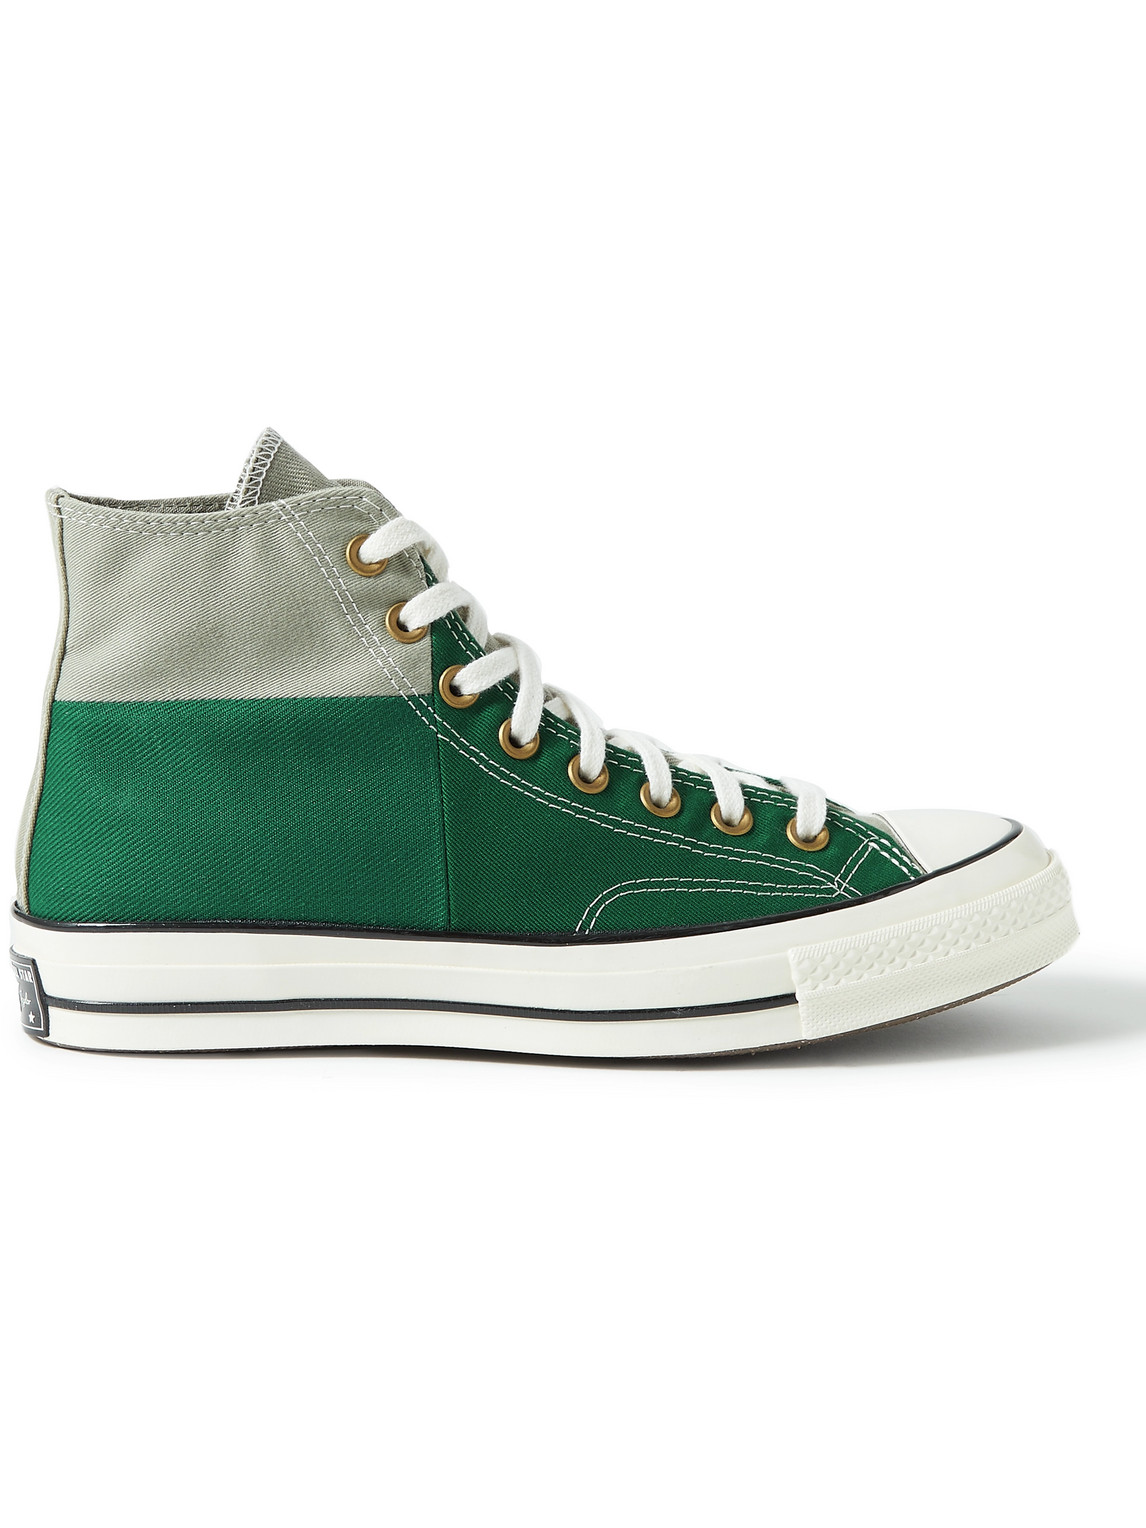 Converse Chuck 70 Colour-Block Recycled Canvas High-Top Sneakers